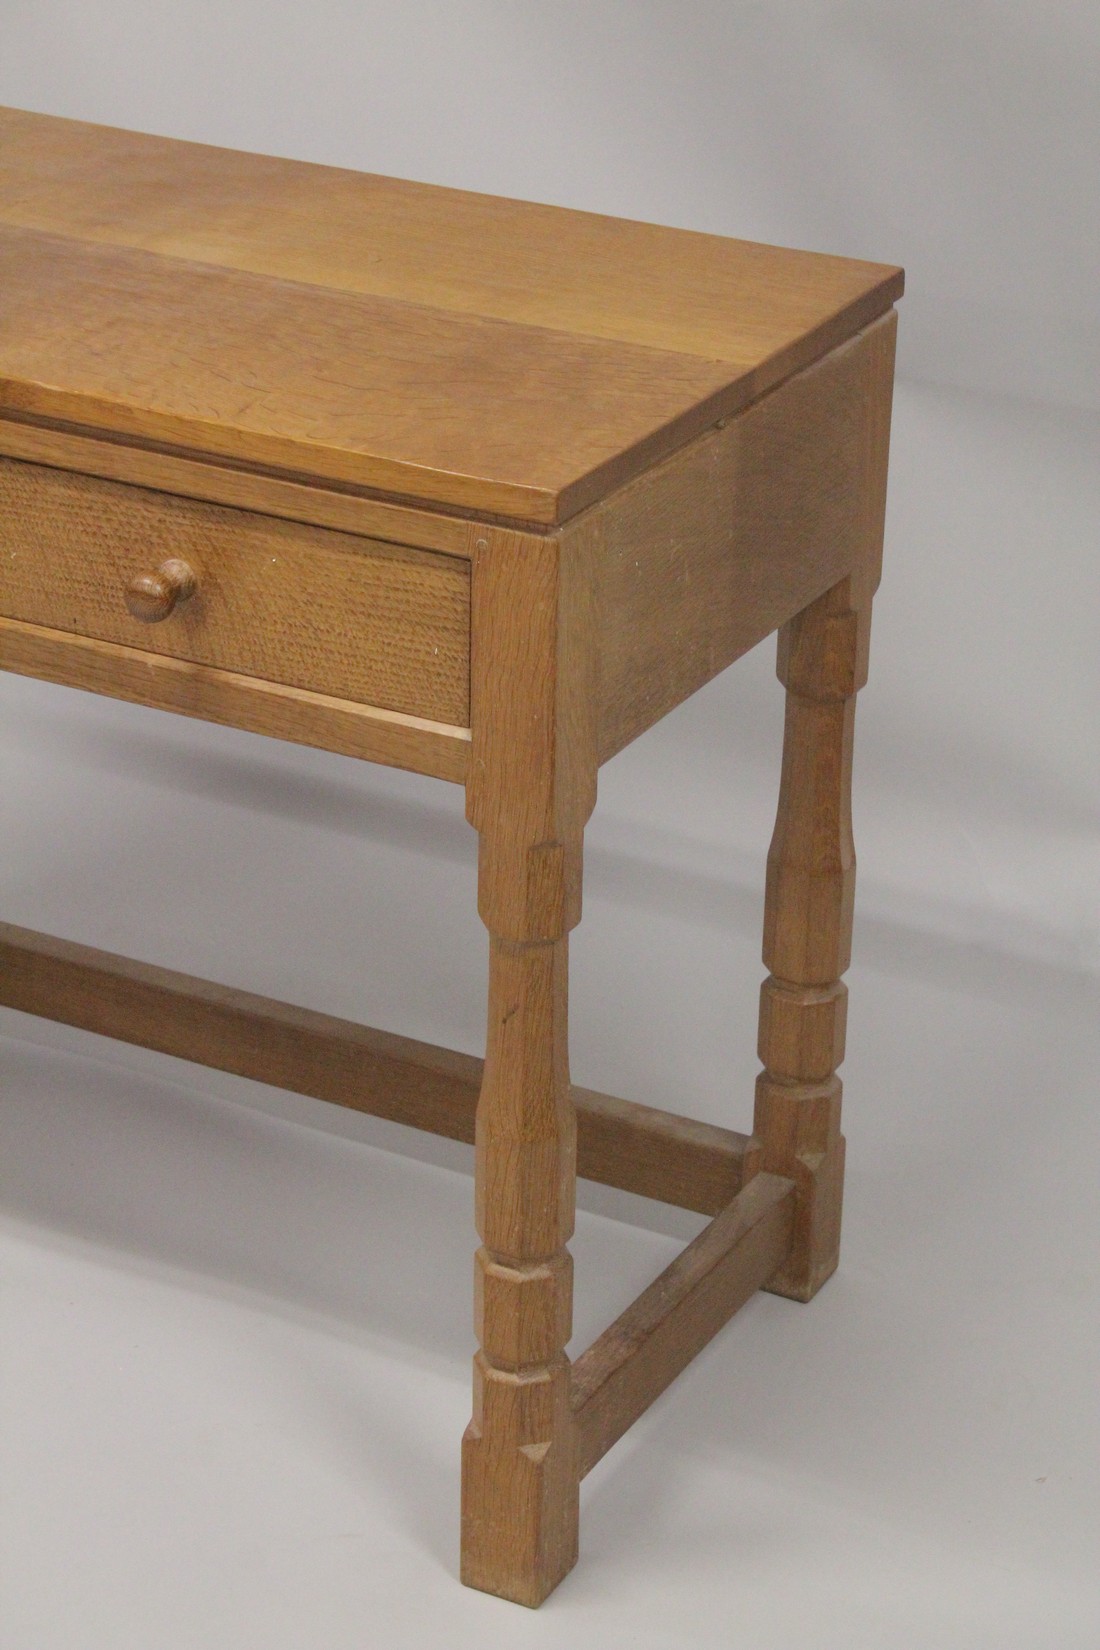 ROBERT "MOUSEMAN" THOMPSON. AN OAK SIDE TABLE with an adzed rectangular top, two frieze drawers with - Image 4 of 5